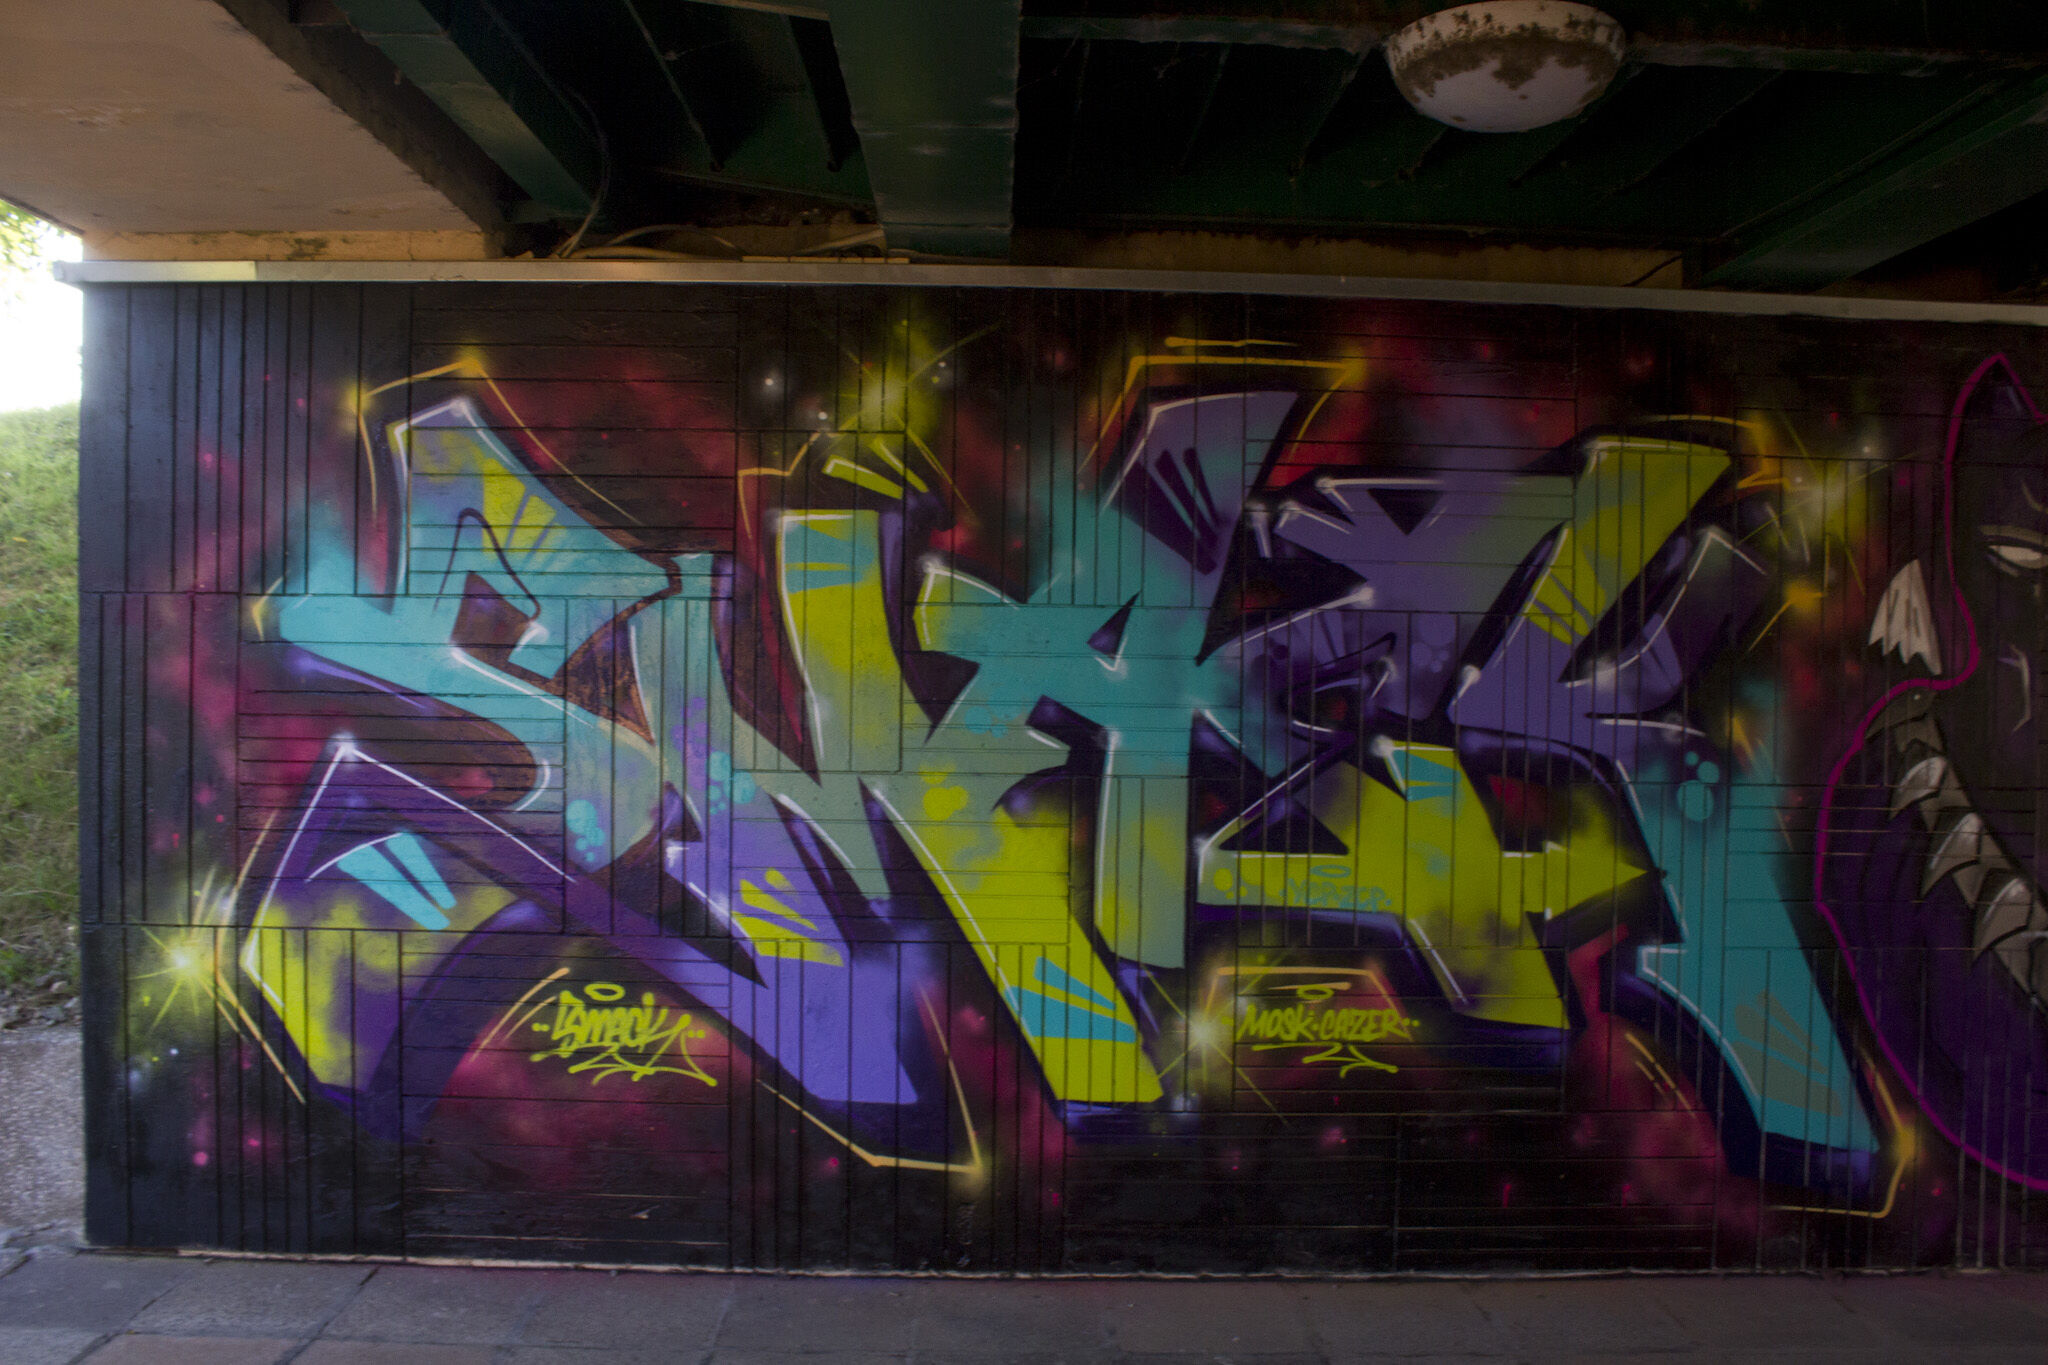 Chez186, Sarme, Poster, Kexer, Chino, Smack184, Lunar&mdash;Only fools and cans